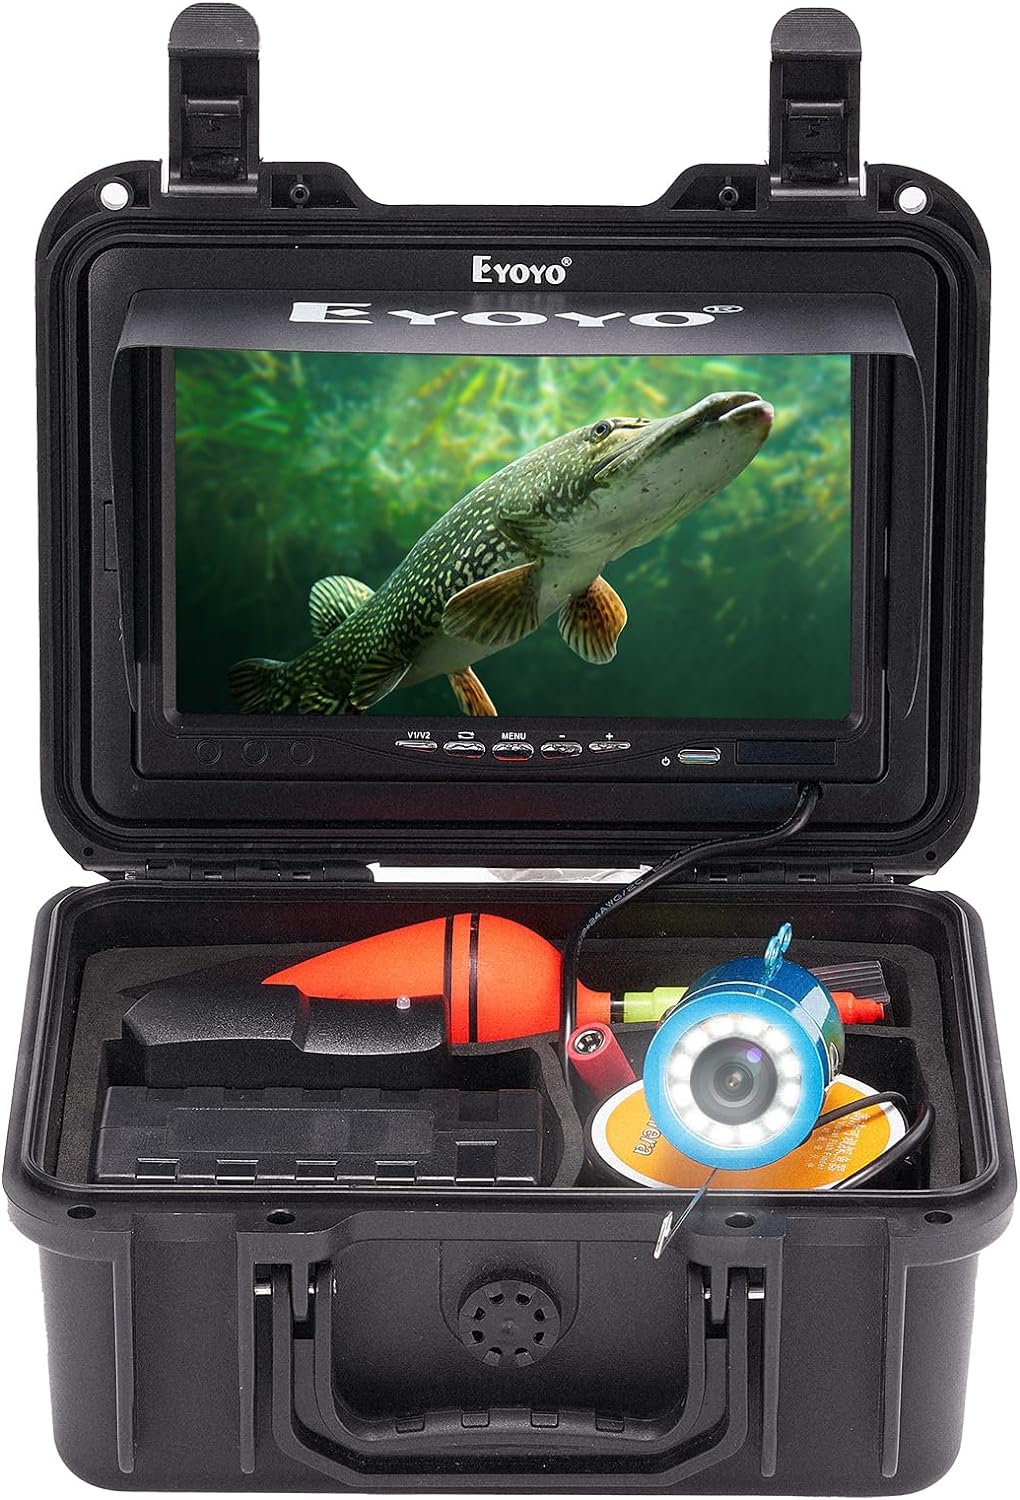 Eyoyofishcam Underwater Fishing Camera, Ice Fishing Camera, Portable Fish Finder Camera HD 1000 TVL 12PCS LED Waterproof Camera with 7 Inch LCD Monitor, Carrying Case for Lake Boat Ice Fishing - Eyoyofishcam Underwater Fishing Camera Review